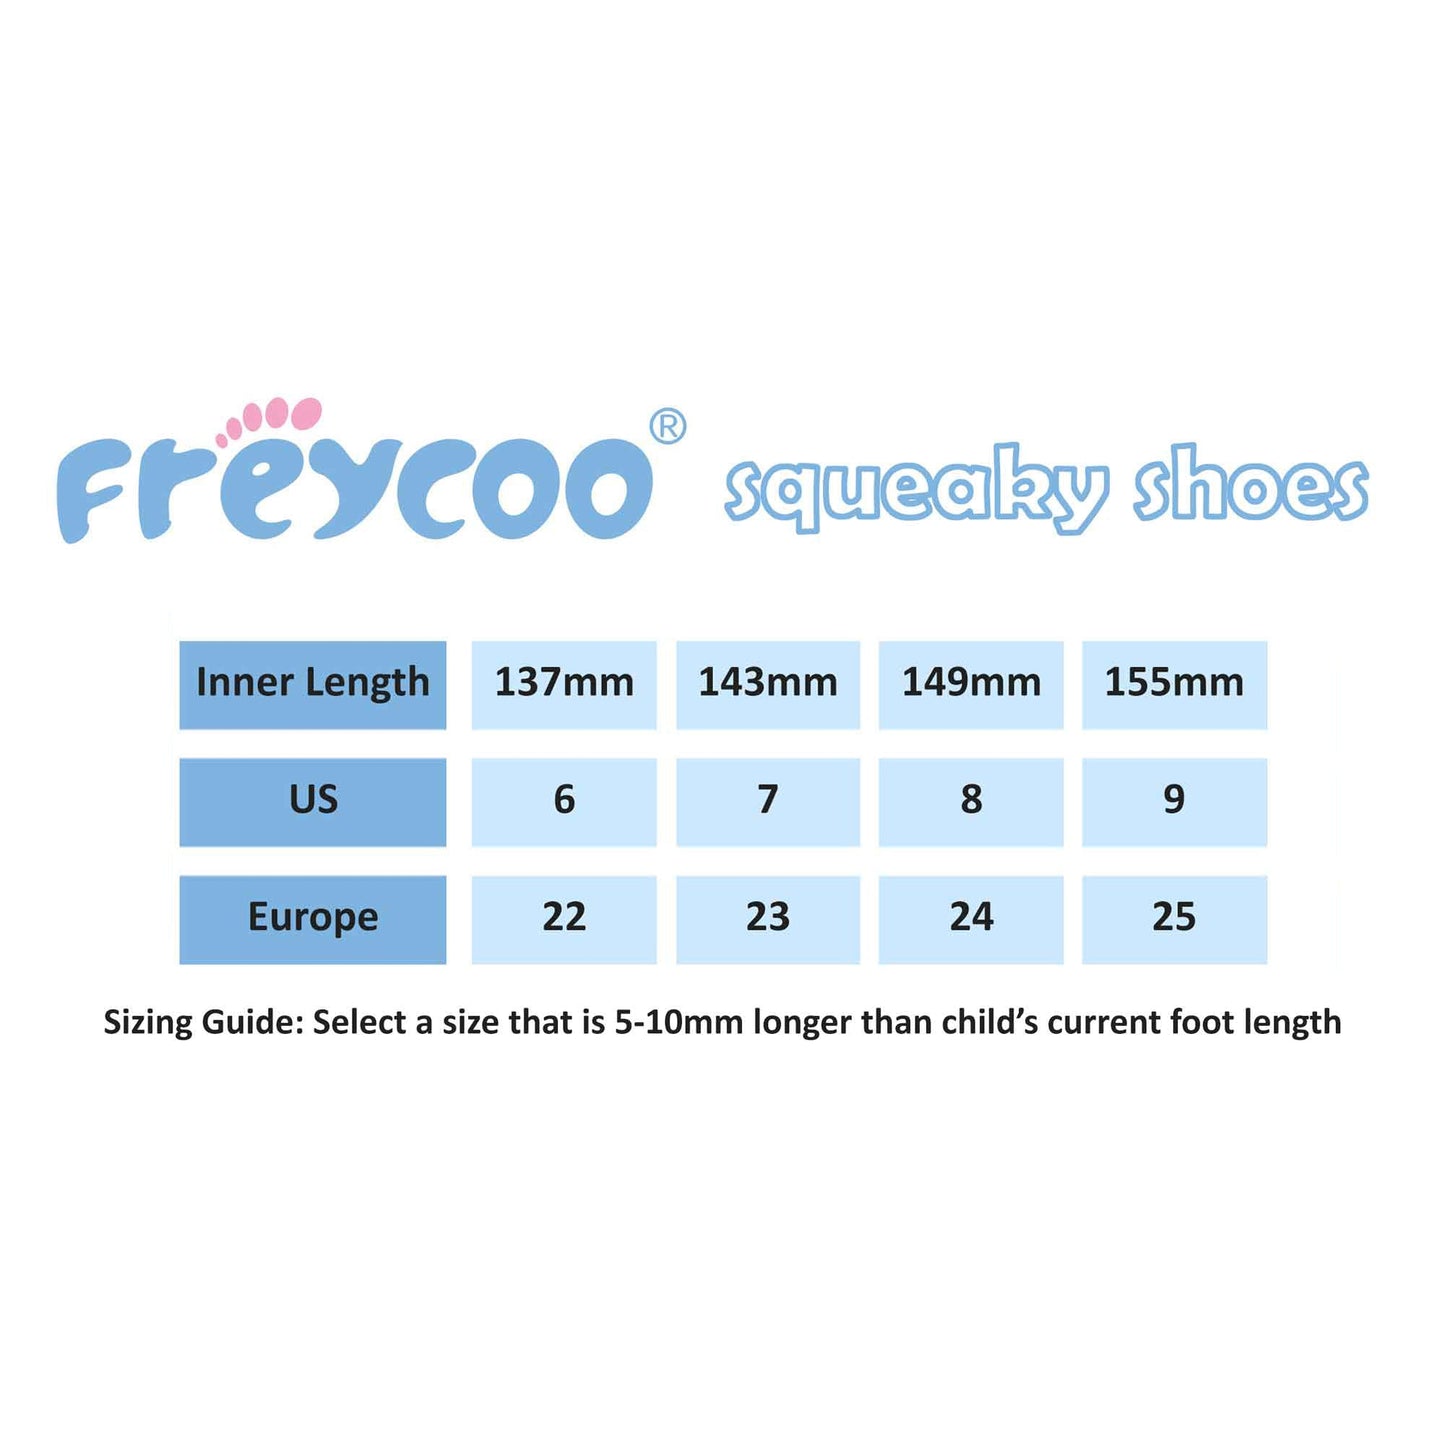 Freycoo - White Beatrice Squeaky shoes